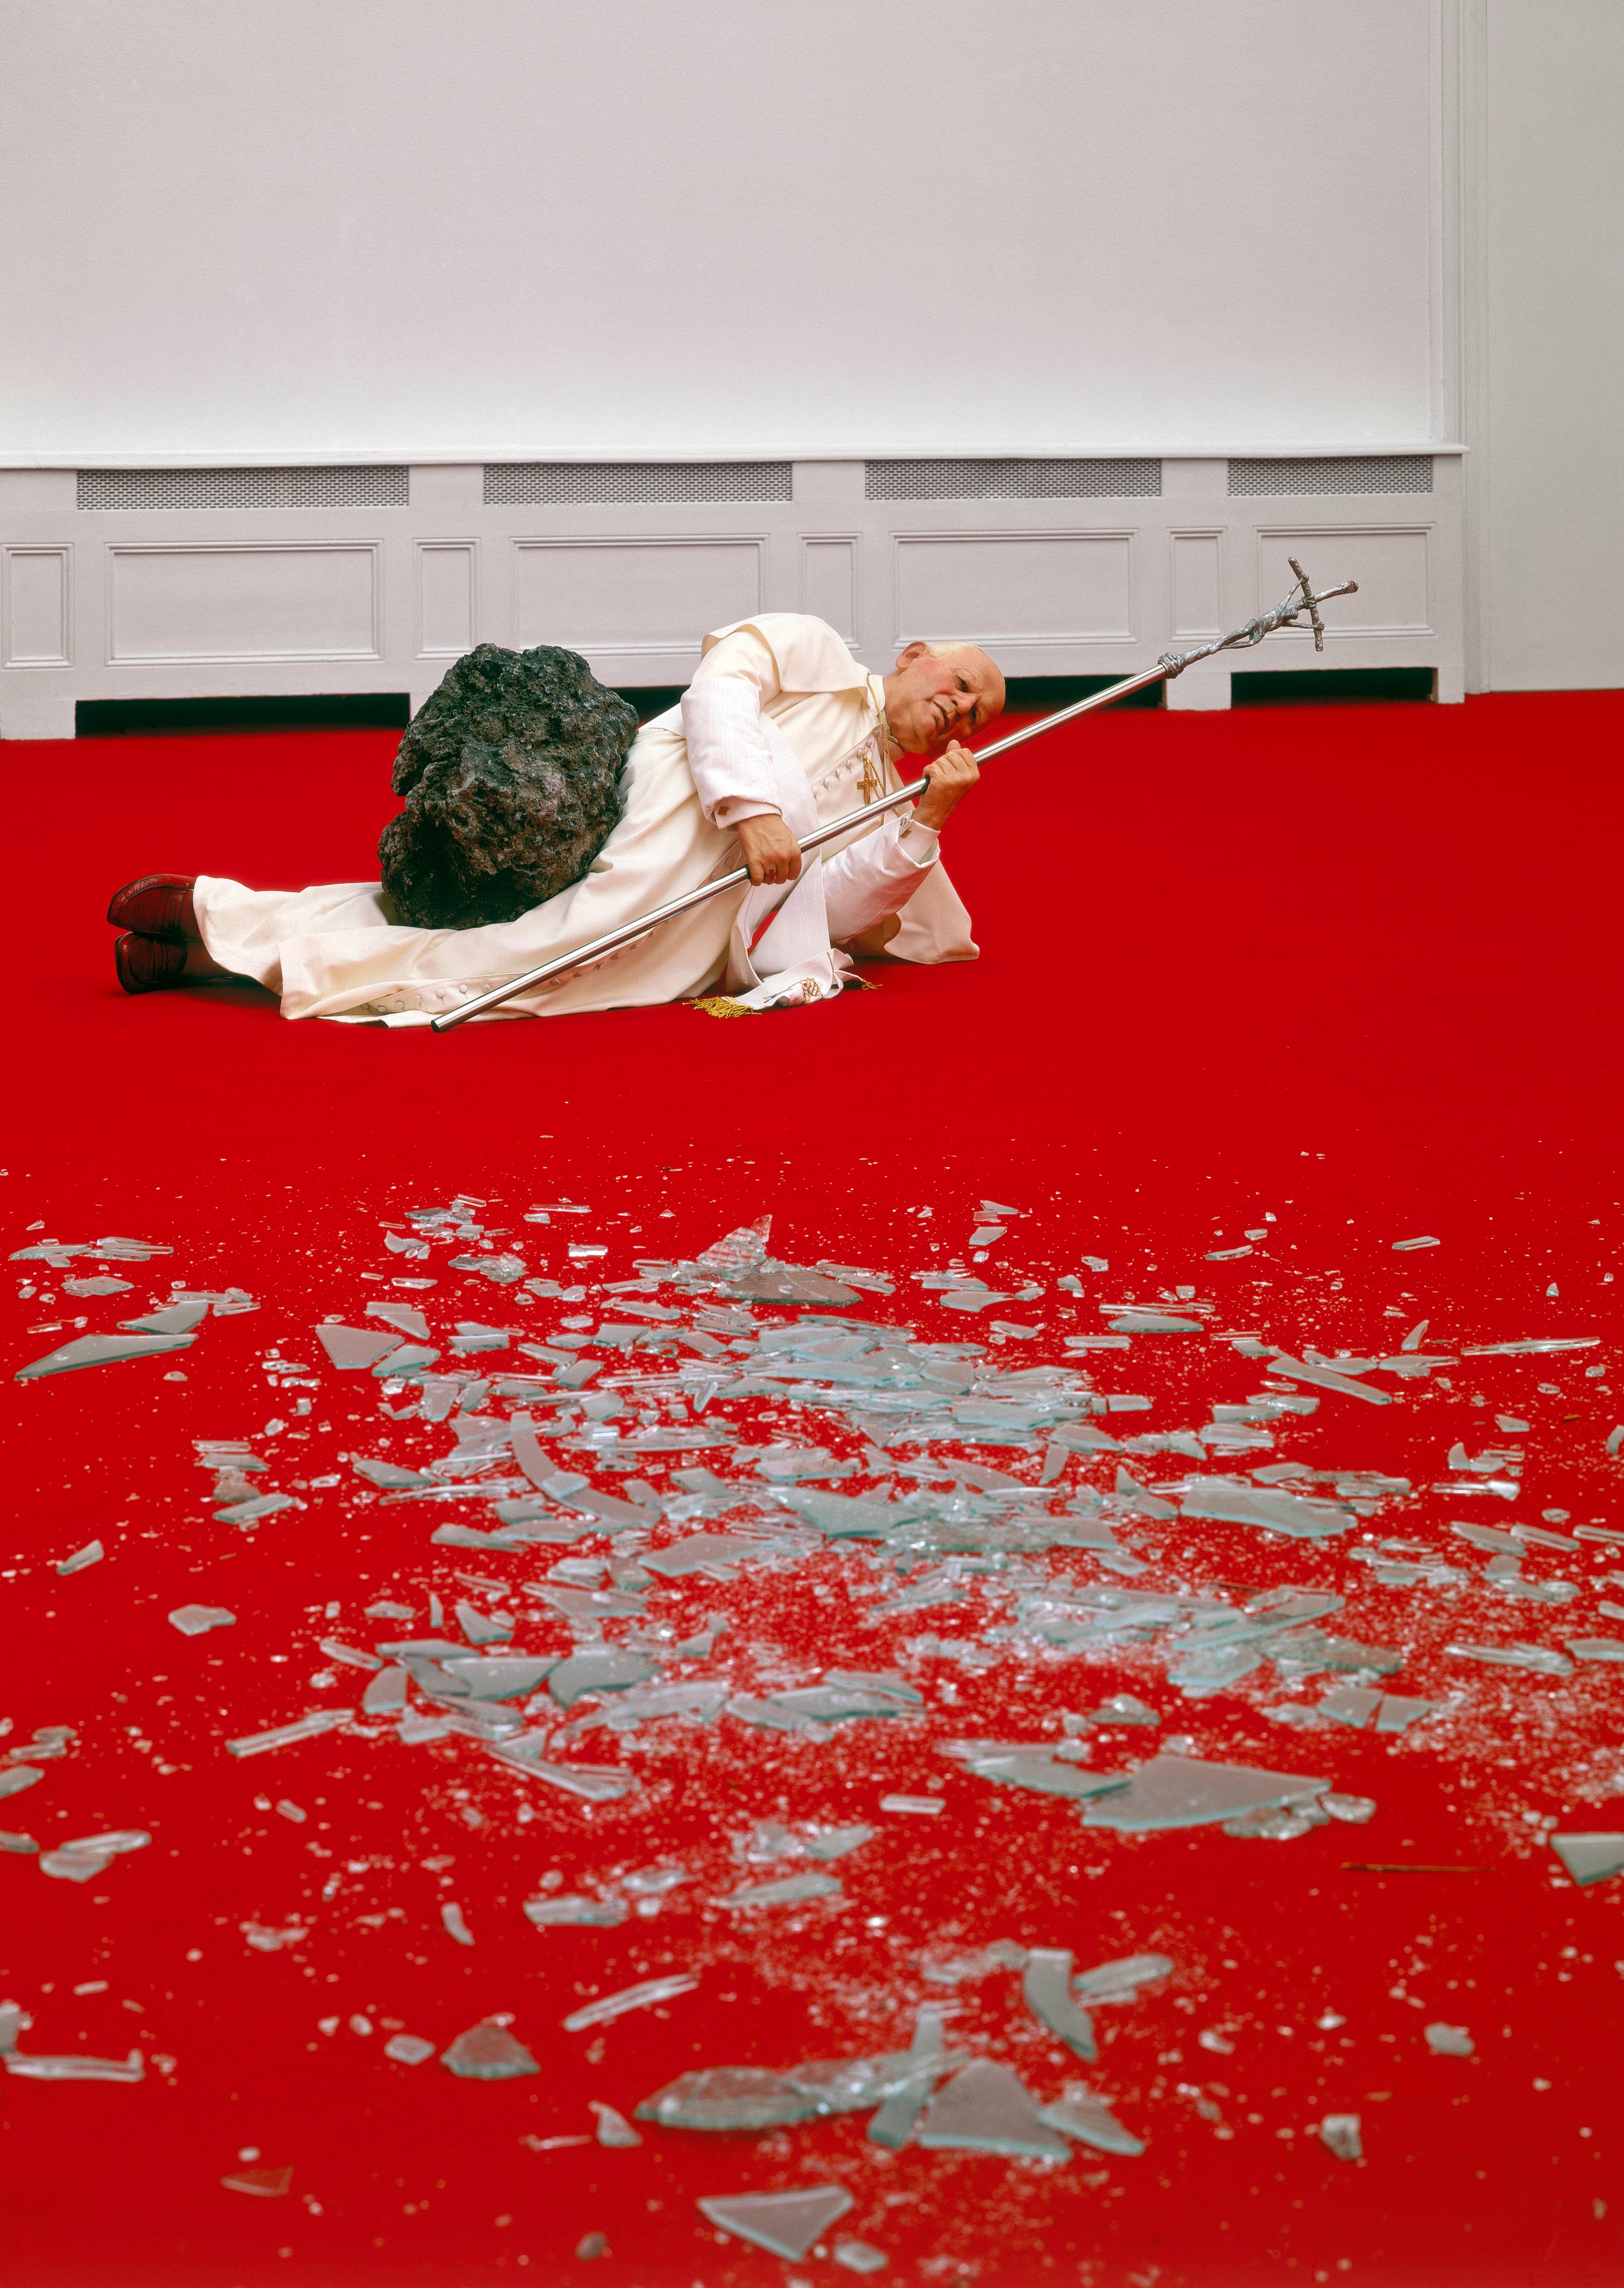 Pope John Paul II clad in his full ceremonial attire, lying beneath a meteorite that has crashed through a glass ceiling and is about to crush him